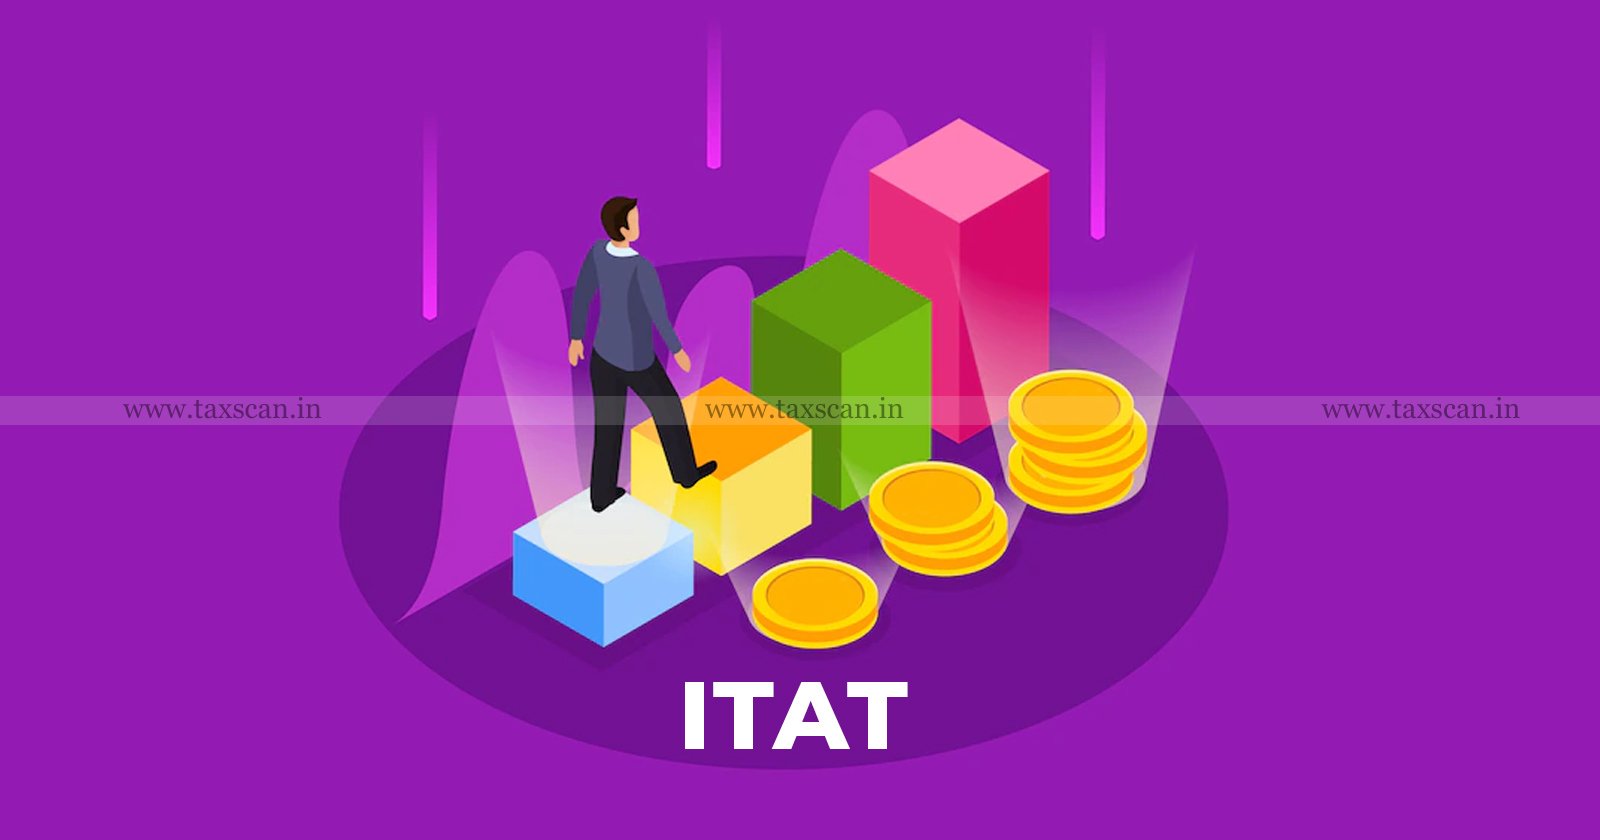 Addition of Income - addition - income - statement of Director - statement - Payments - Third Parties - ITAT - taxscan